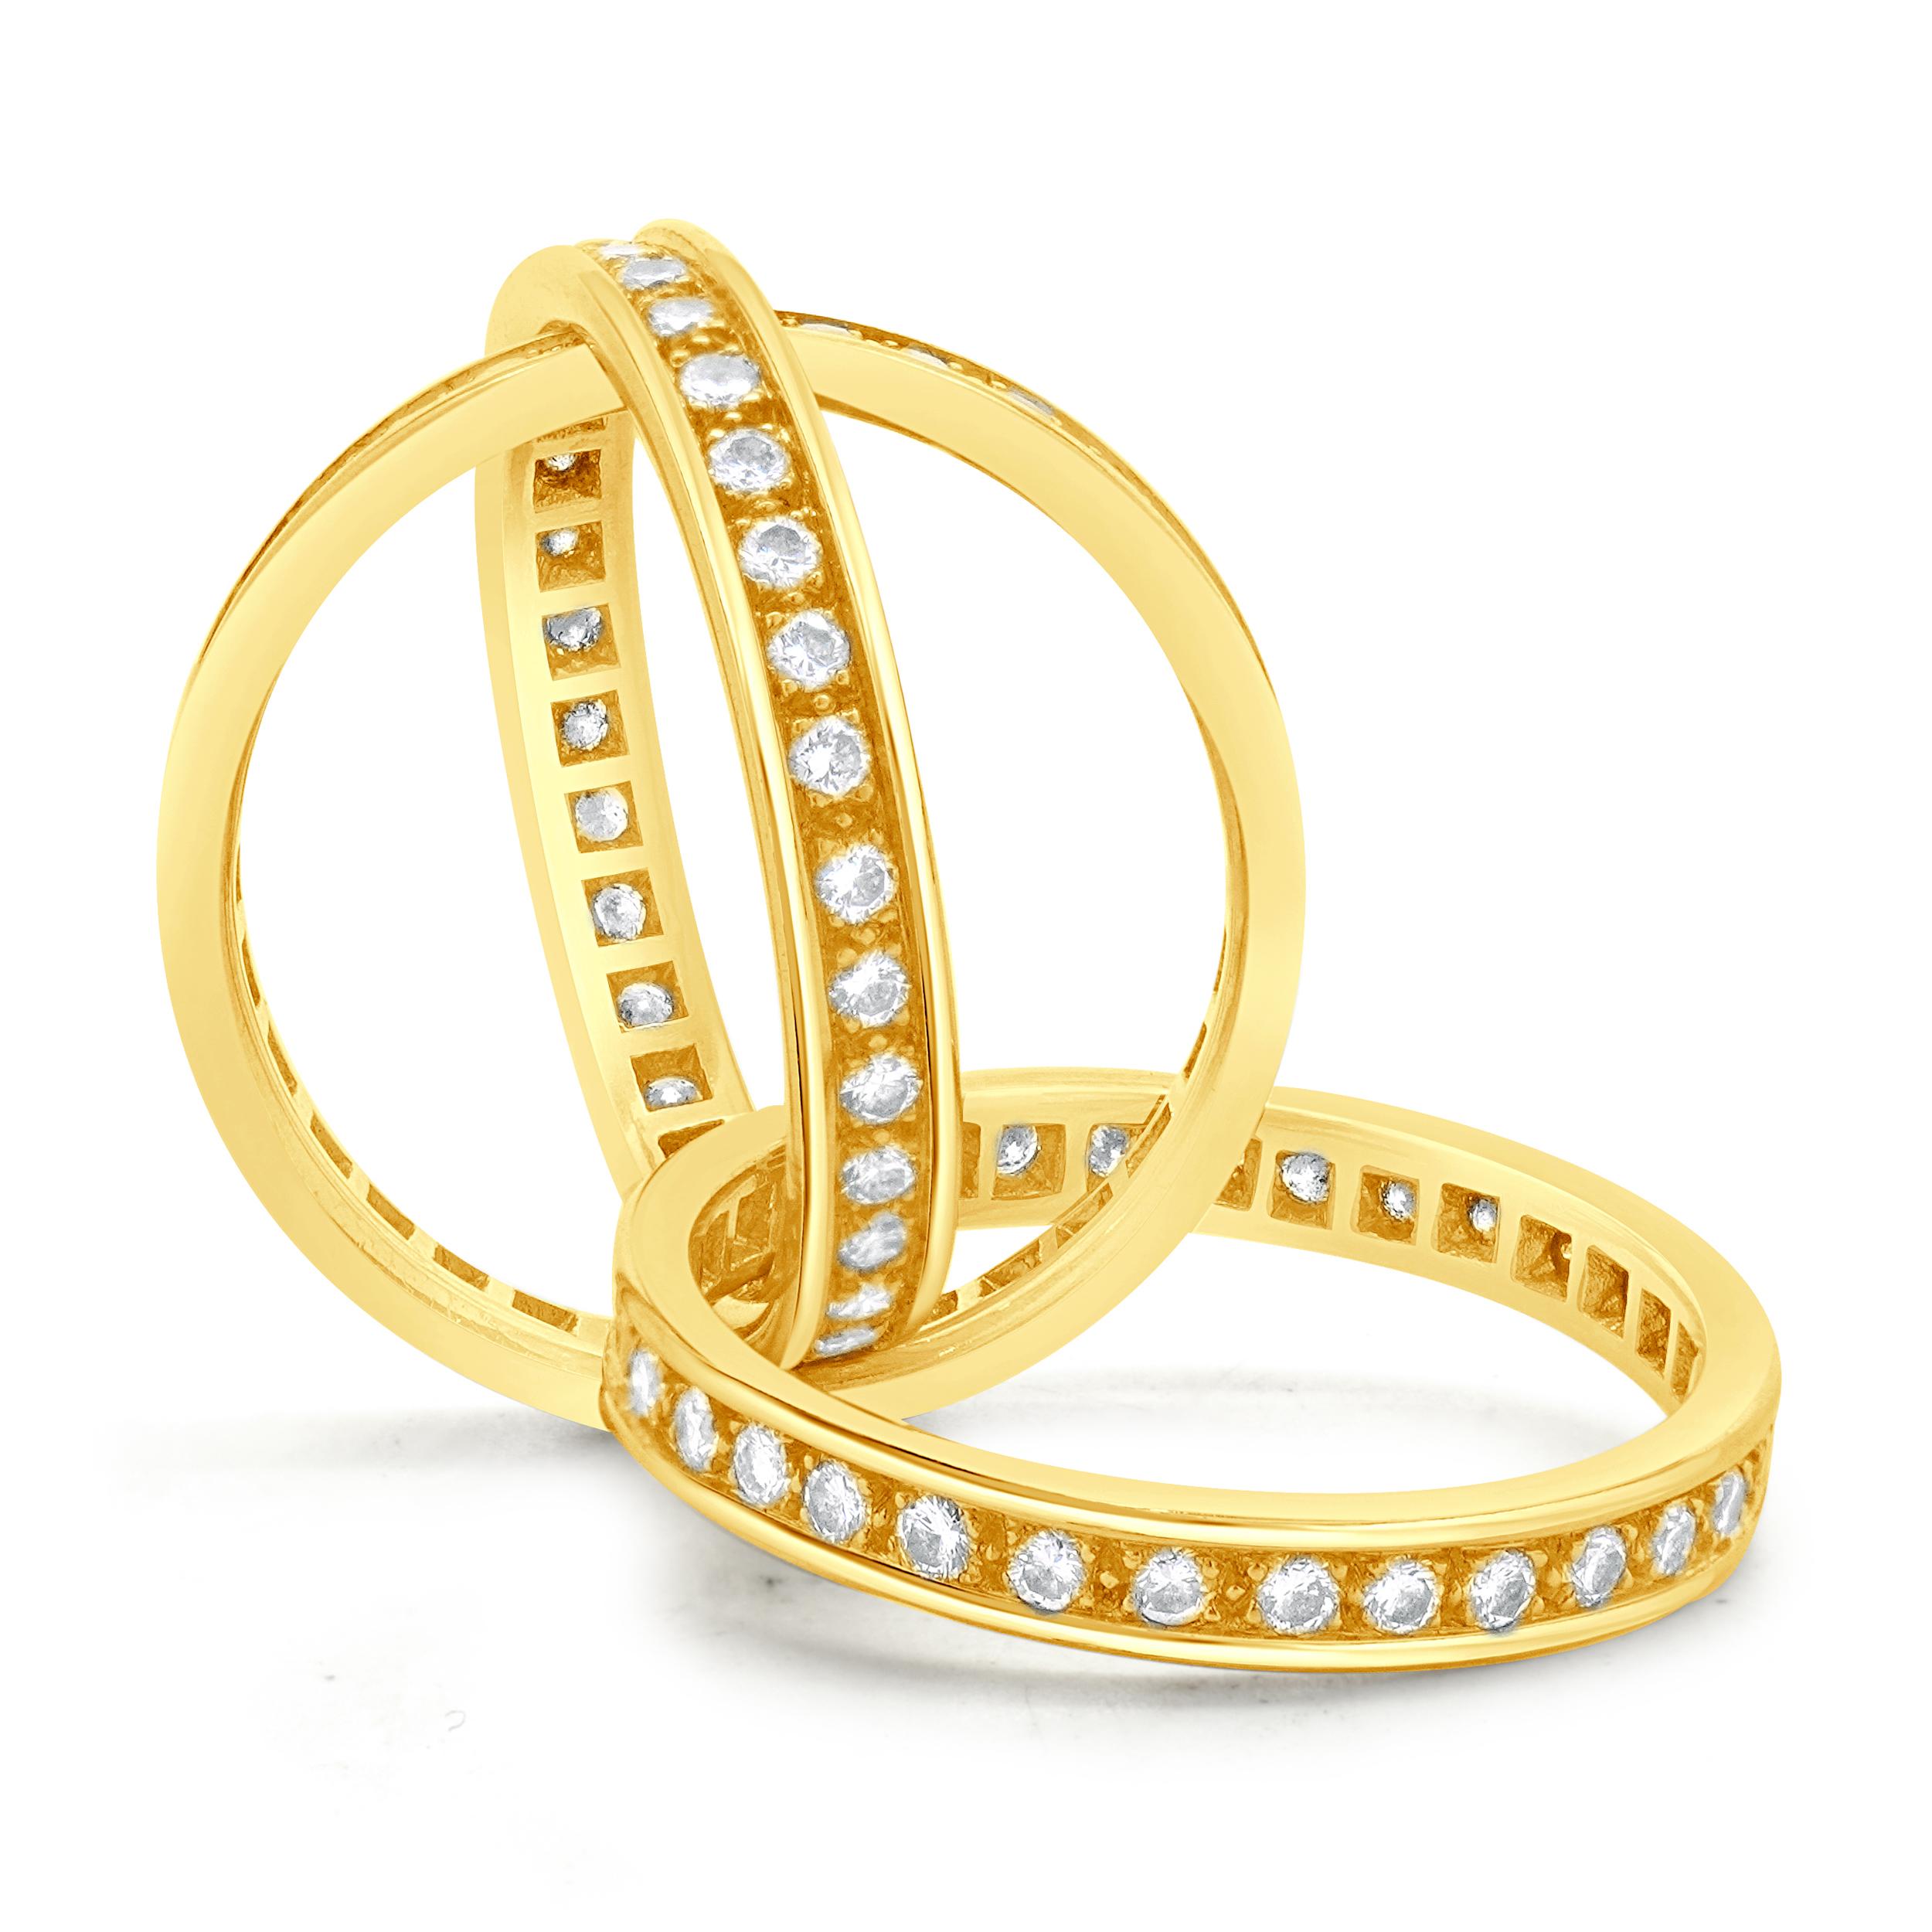 Cartier 18 Karat Yellow Gold Trinity Diamond Rolling Ring In Excellent Condition For Sale In Scottsdale, AZ